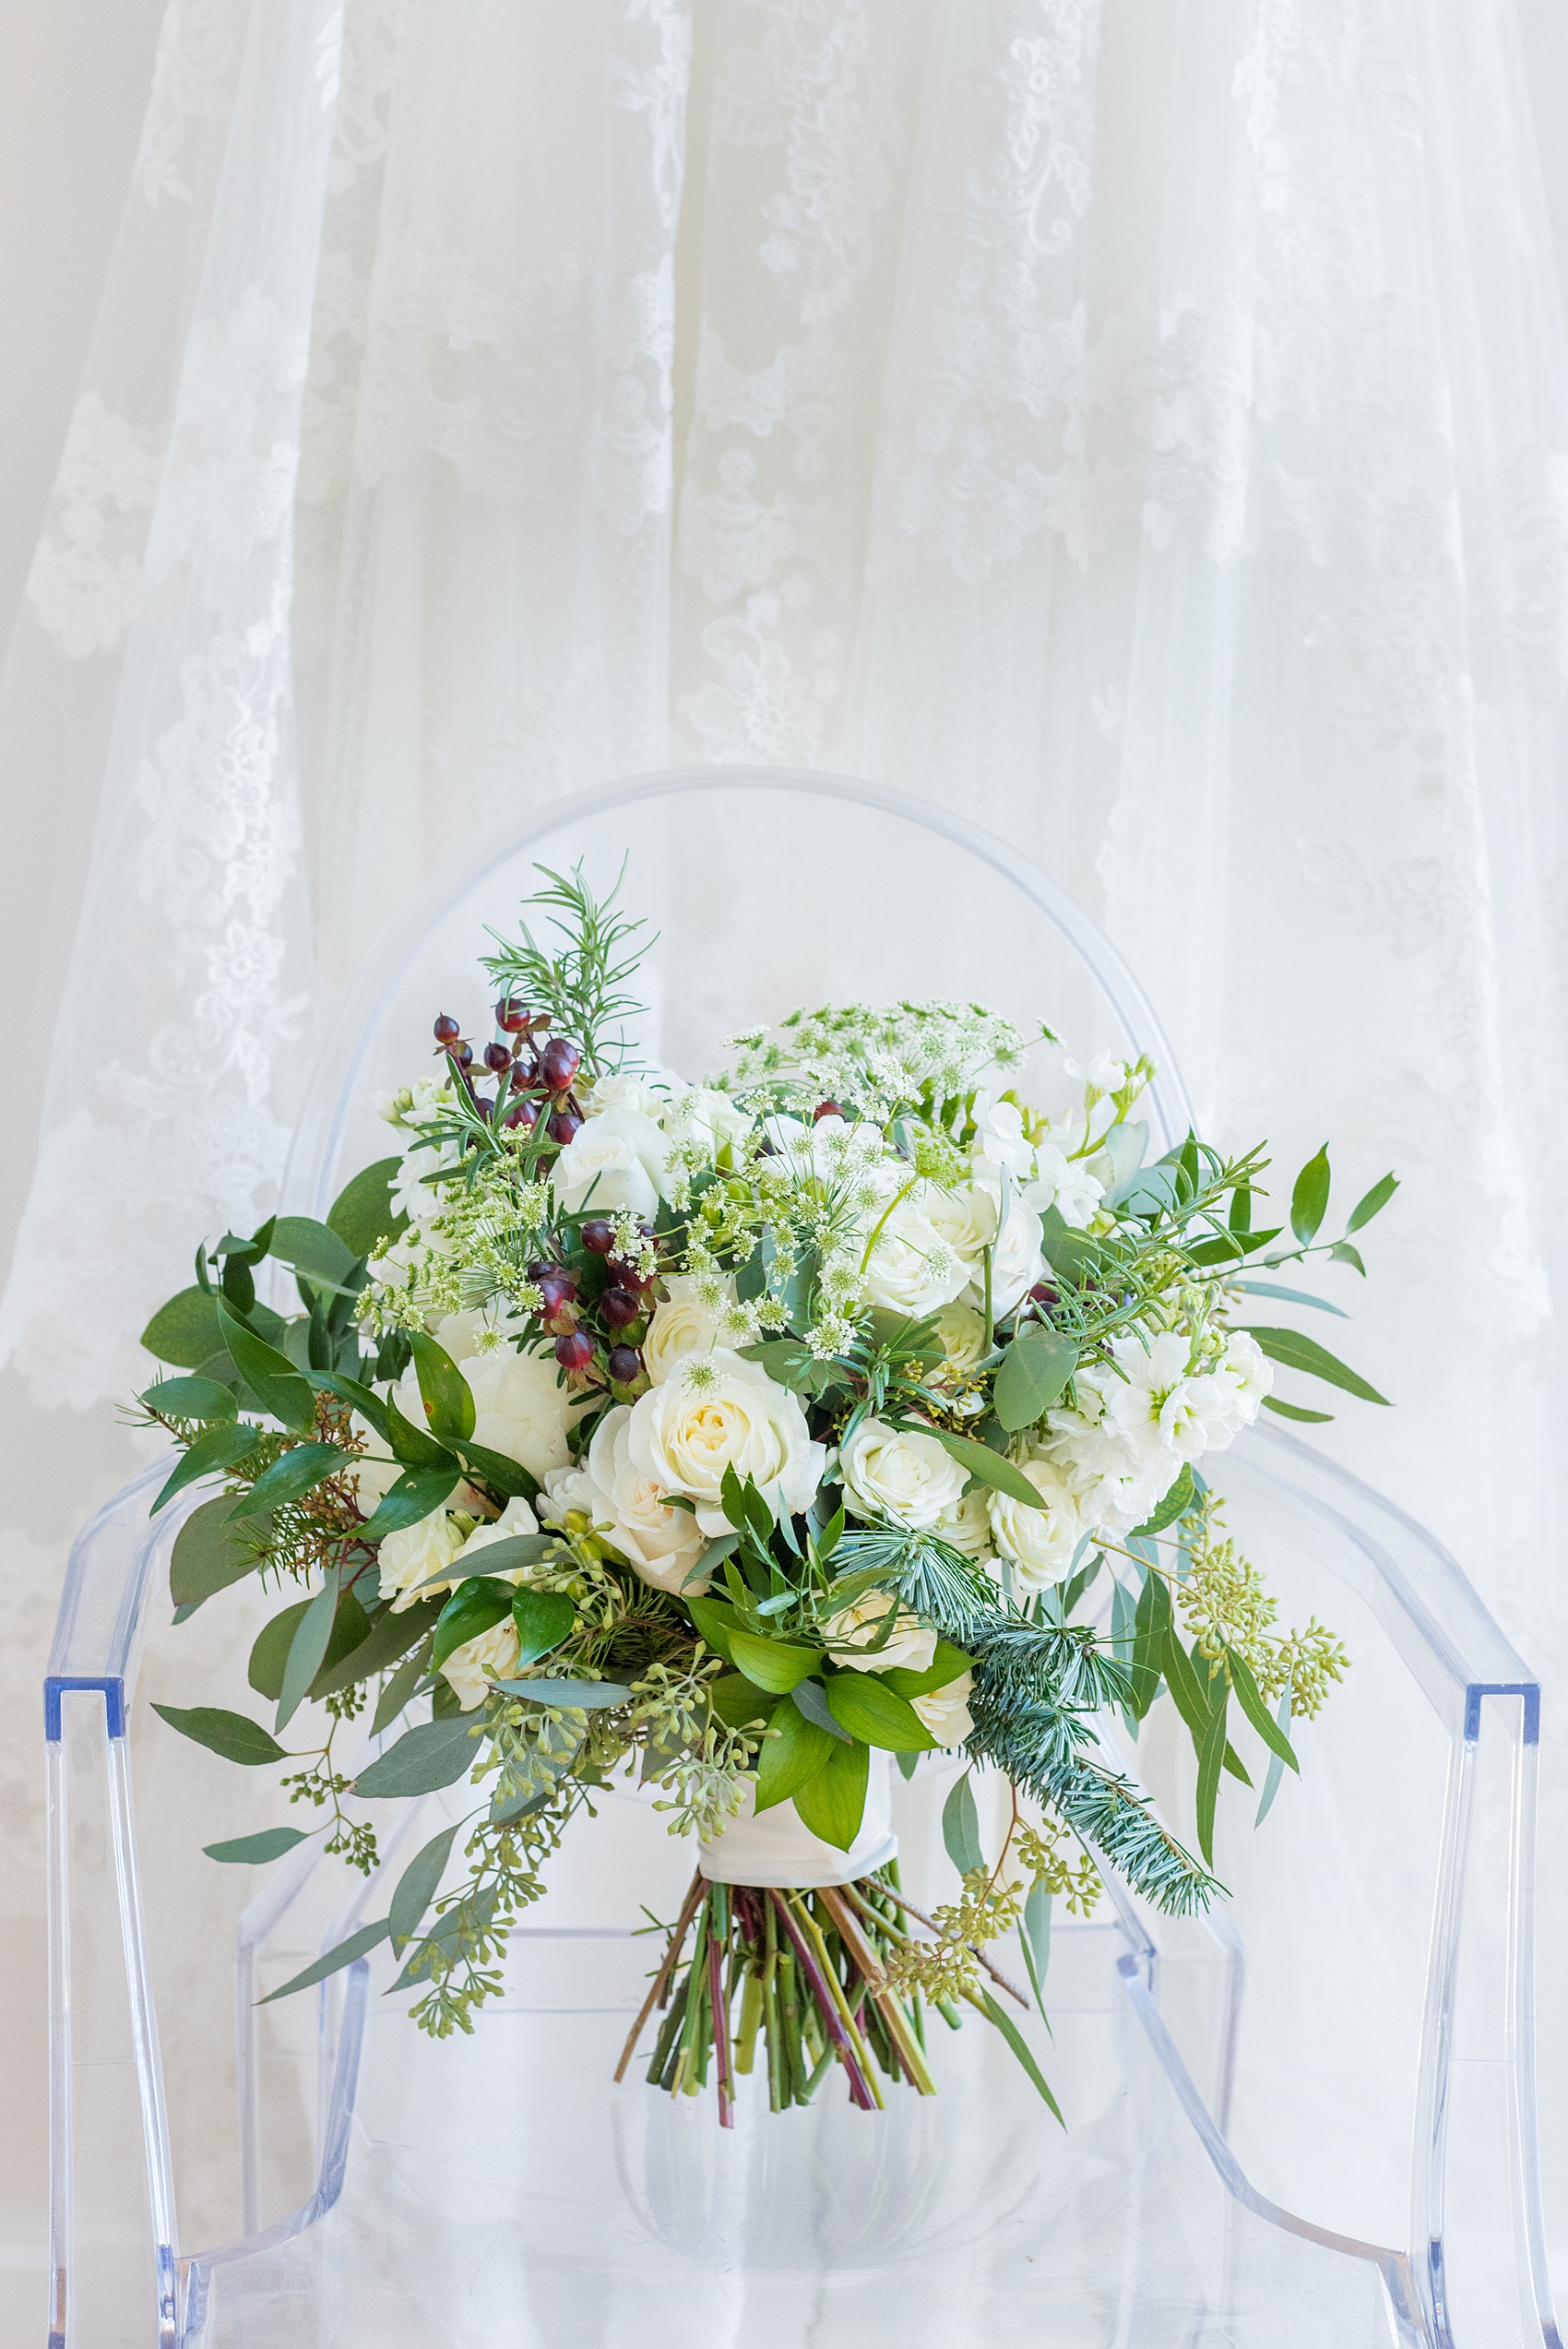 Pictures from a Christmas inspired wedding in downtown Raleigh, North Carolina by Mikkel Paige Photography. The bride carried a holiday bouquet for her church ceremony at The Stockroom at 230 with rosemary, ranunculus and berries. Click through for more ideas from their beautiful celebration, including decor photos in a green and gold decor palette for their reception. #mikkelpaige #raleighweddingphotographer #downtownRaleigh #greenandgoldwedding #gettingready #holidaybouquet #christmaswedding